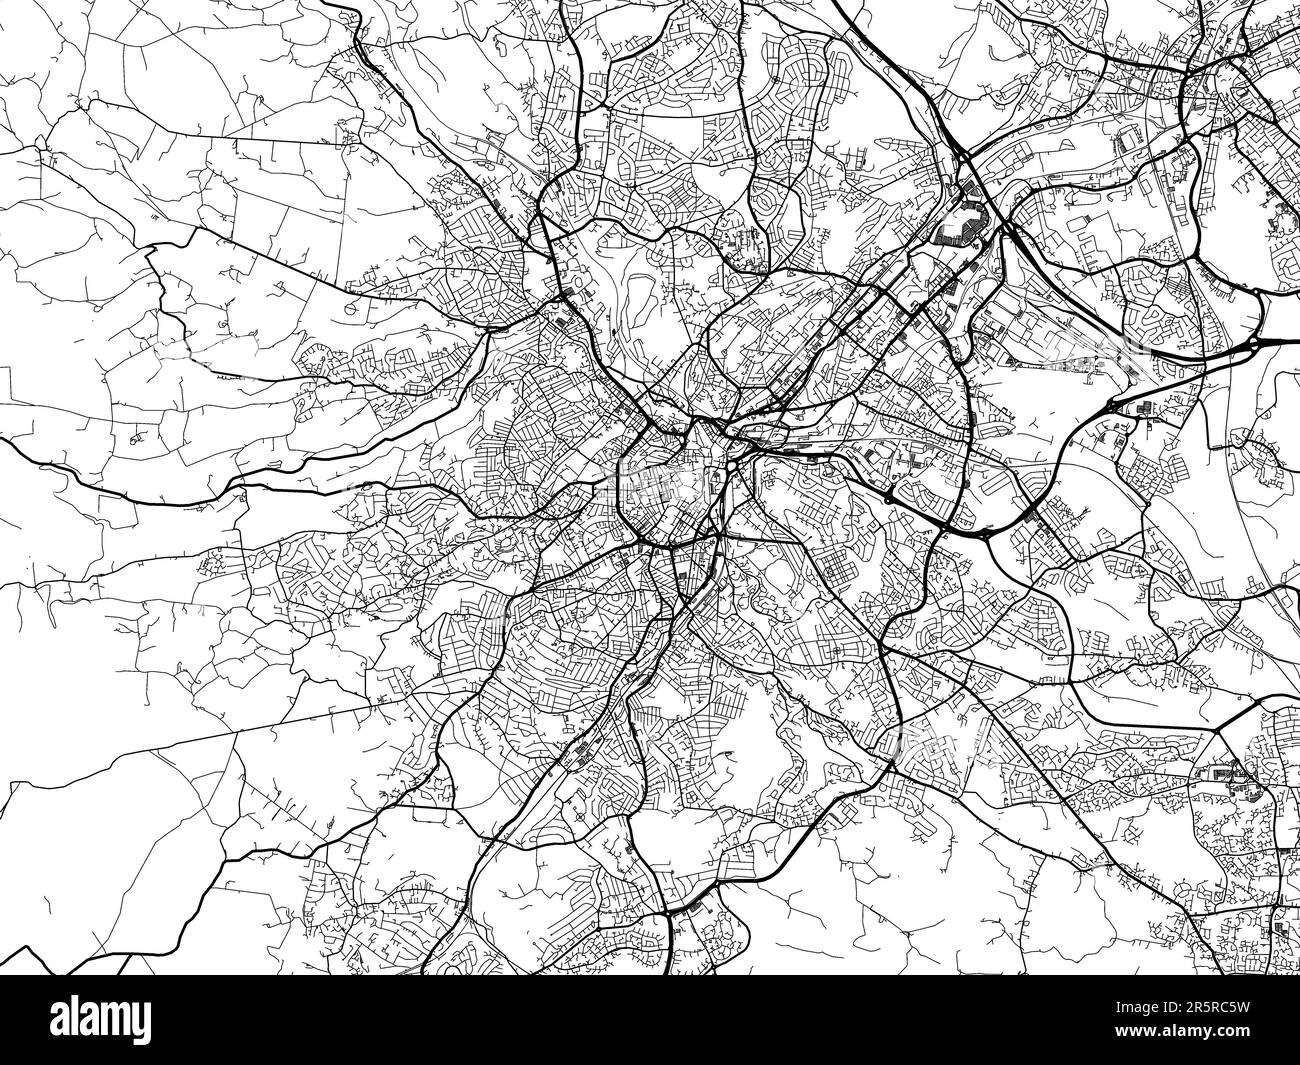 Road map of the city of  Sheffield in the United Kingdom on a white background. Stock Photo